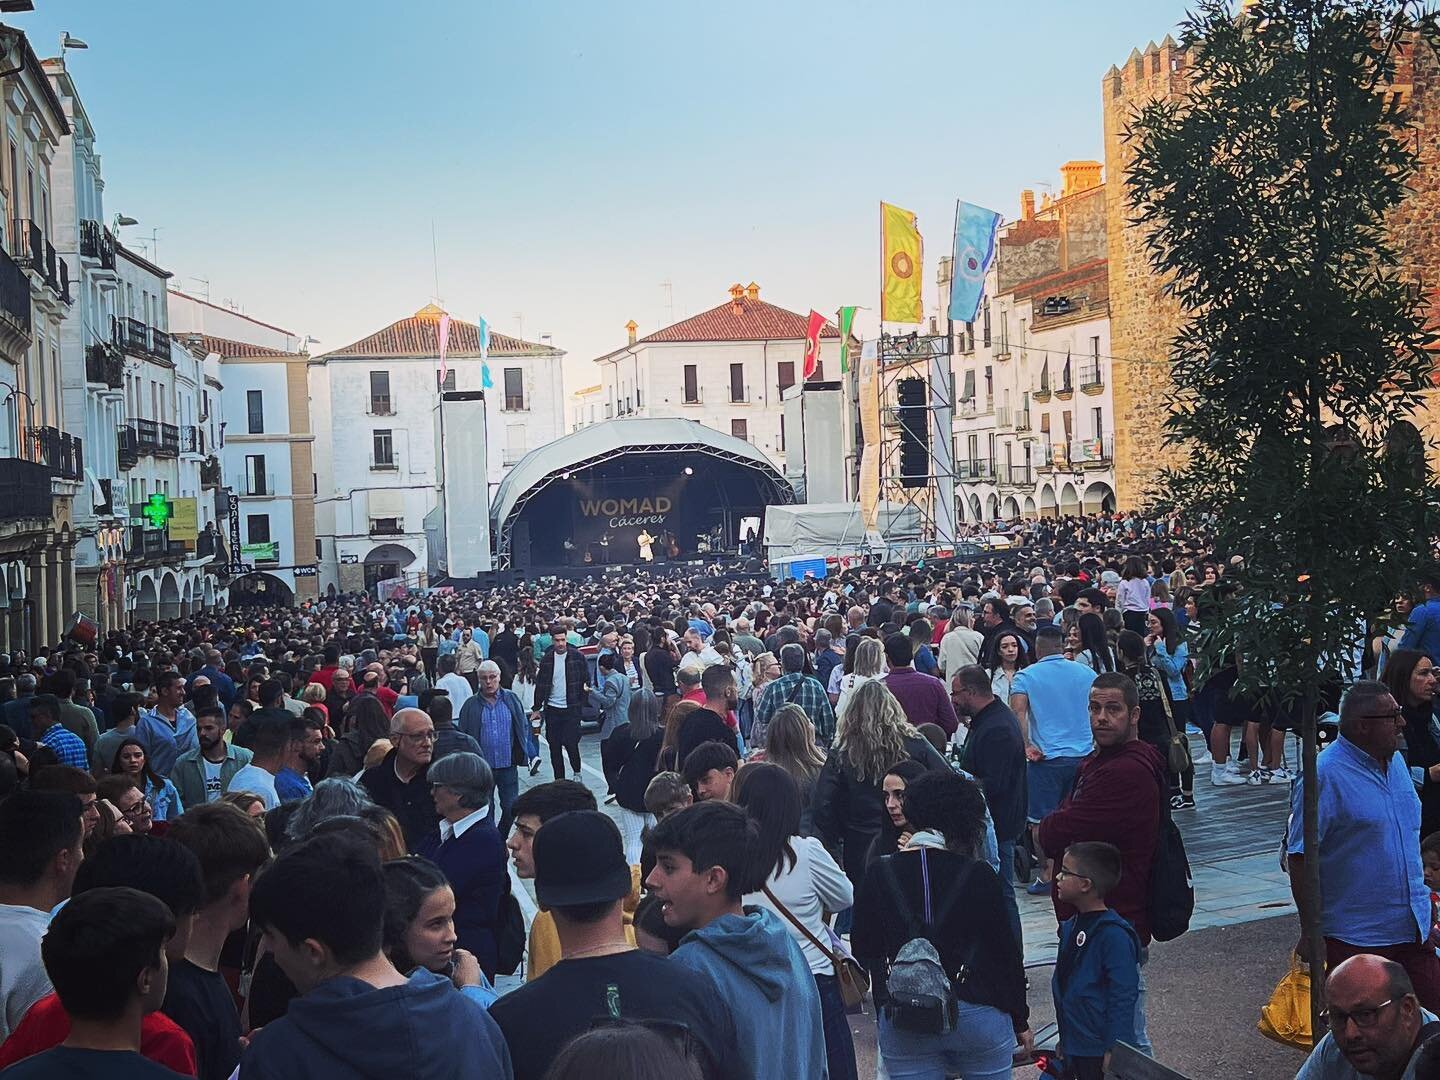 Super excited to be back in Spain to close out the amazing @womad_caceres_oficial tonight to an estimated crowd of nearly 40,000!!

One of our last gigs before lockdown was at @clamoreslivemusic in Madrid, and it&rsquo;s such a joy to be back in this